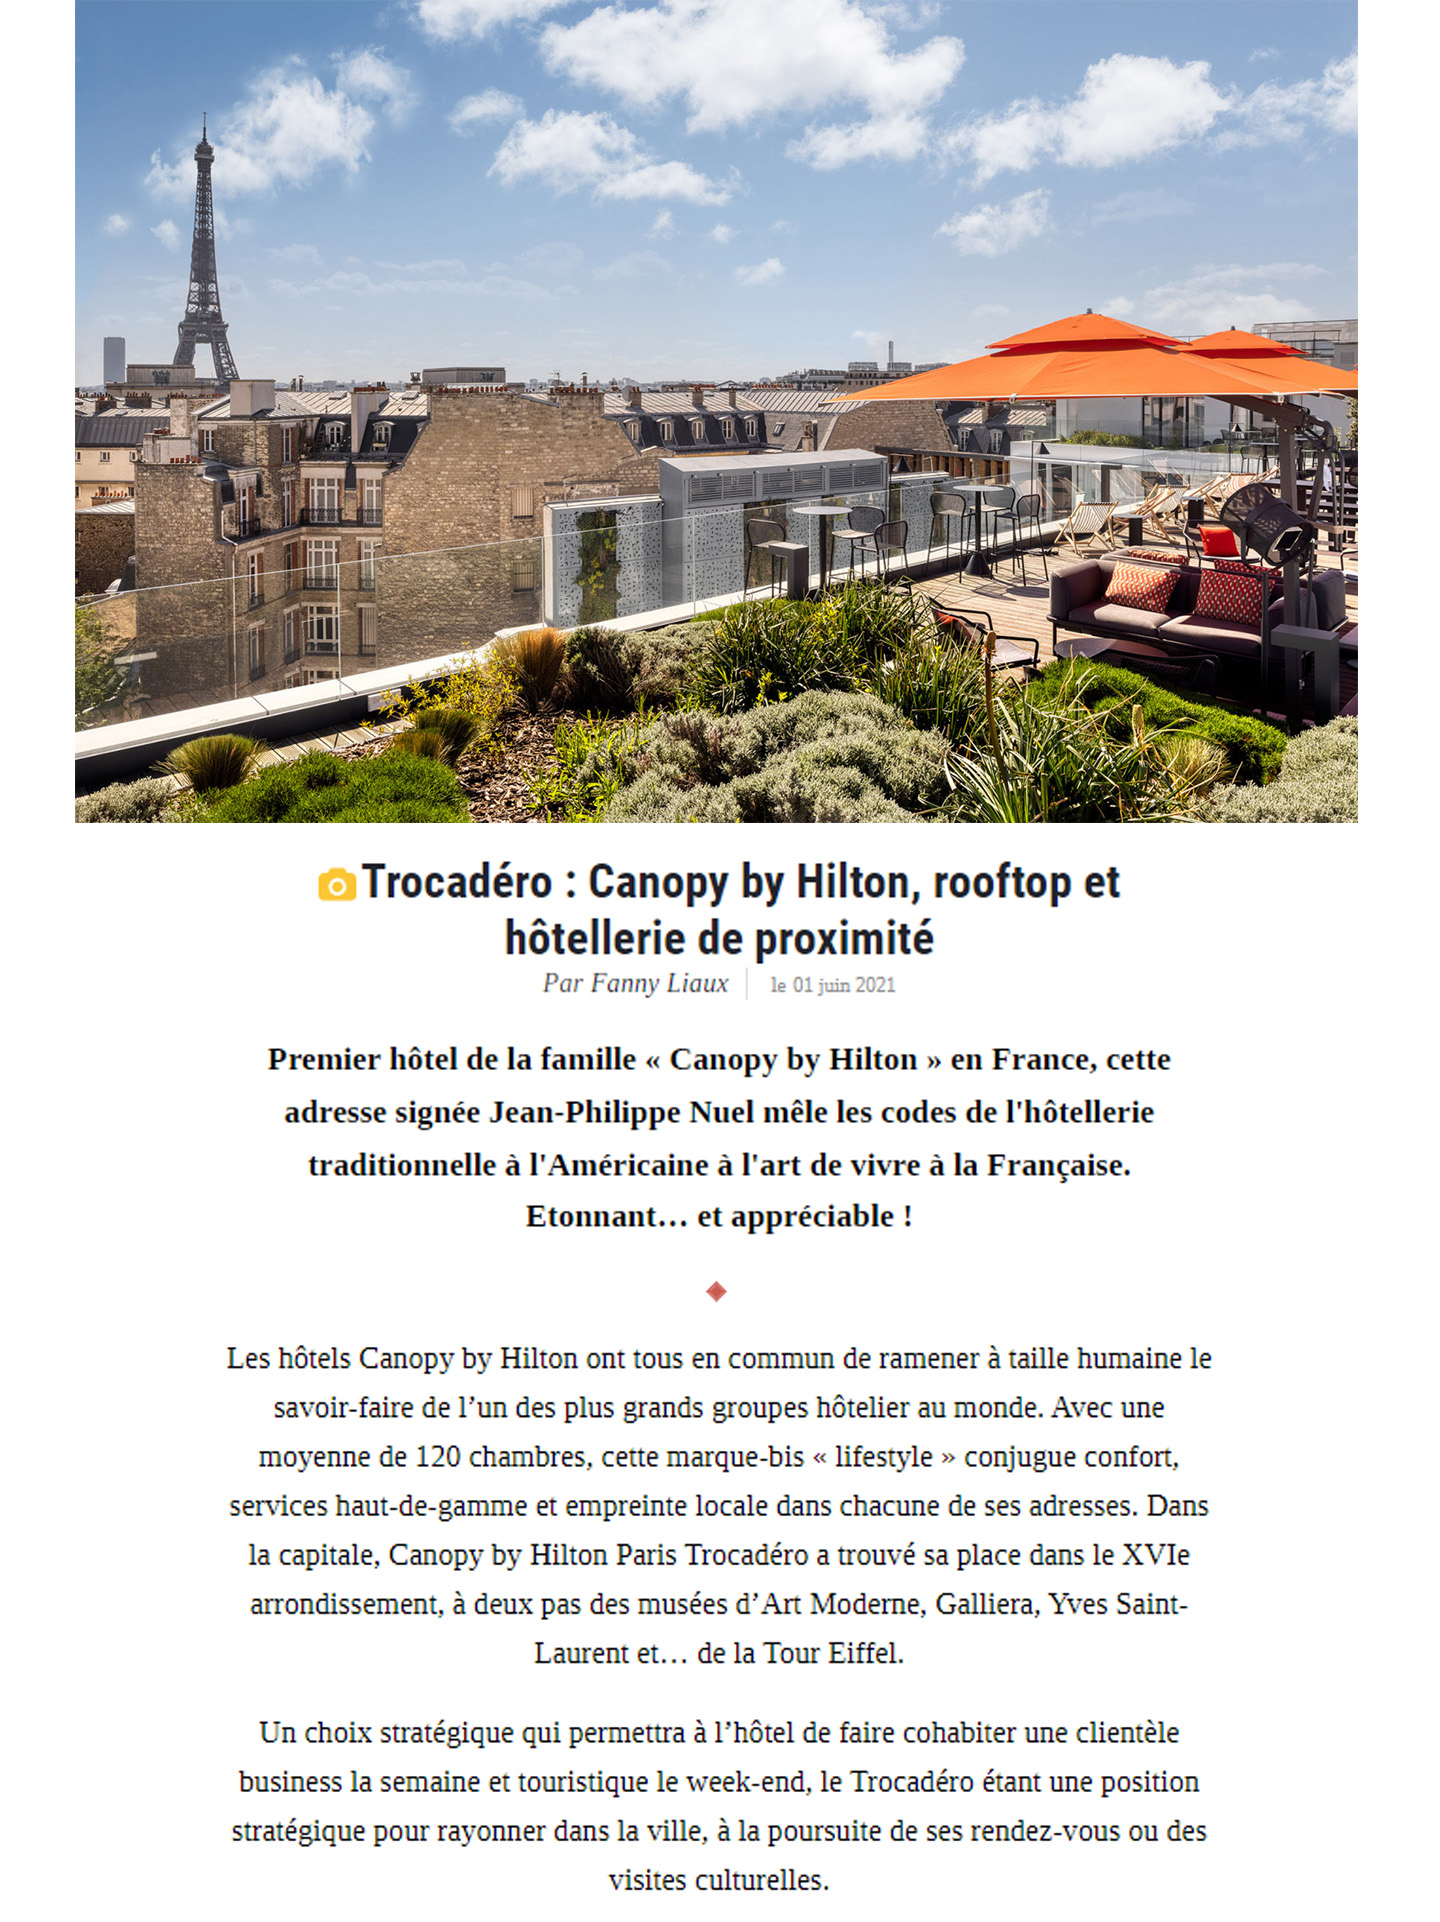 Article on the Canopy by Hilton Paris Trocadero designed by jean-Philippe Nuel studio in the good life magazine, new lifestyle hotel, luxury interior design